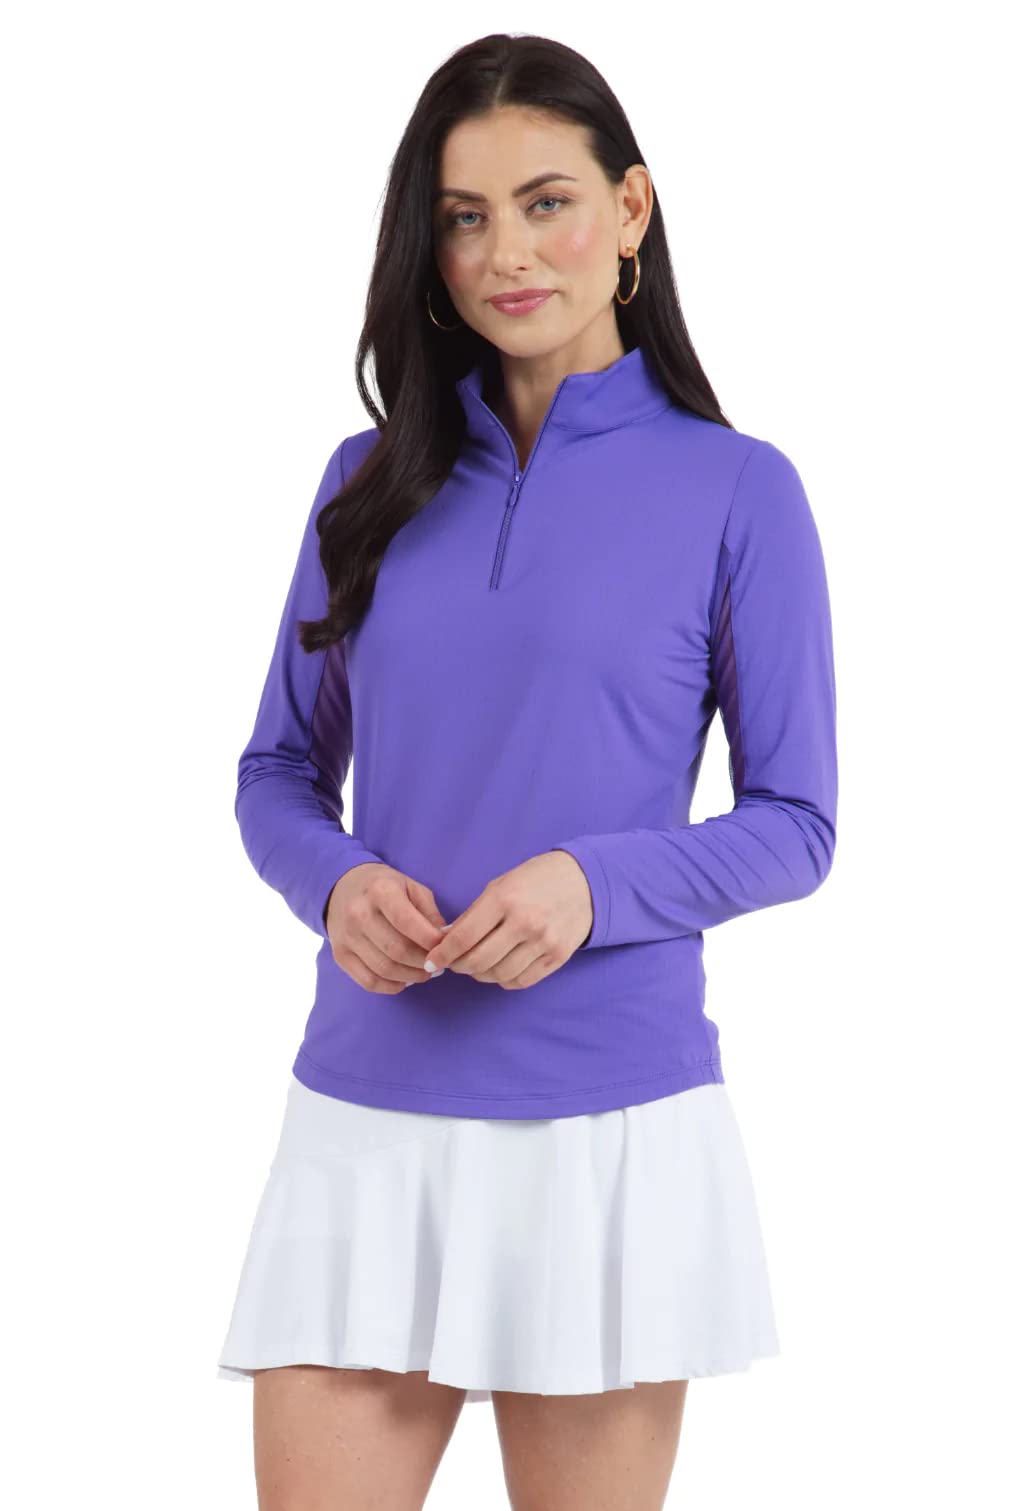 IBKUL Athleisure Wear Sun Protective UPF 50+ Icefil Cooling Tech Long Sleeve Mock Neck Top with Under Arm Mesh 80000 Plum Solid XL